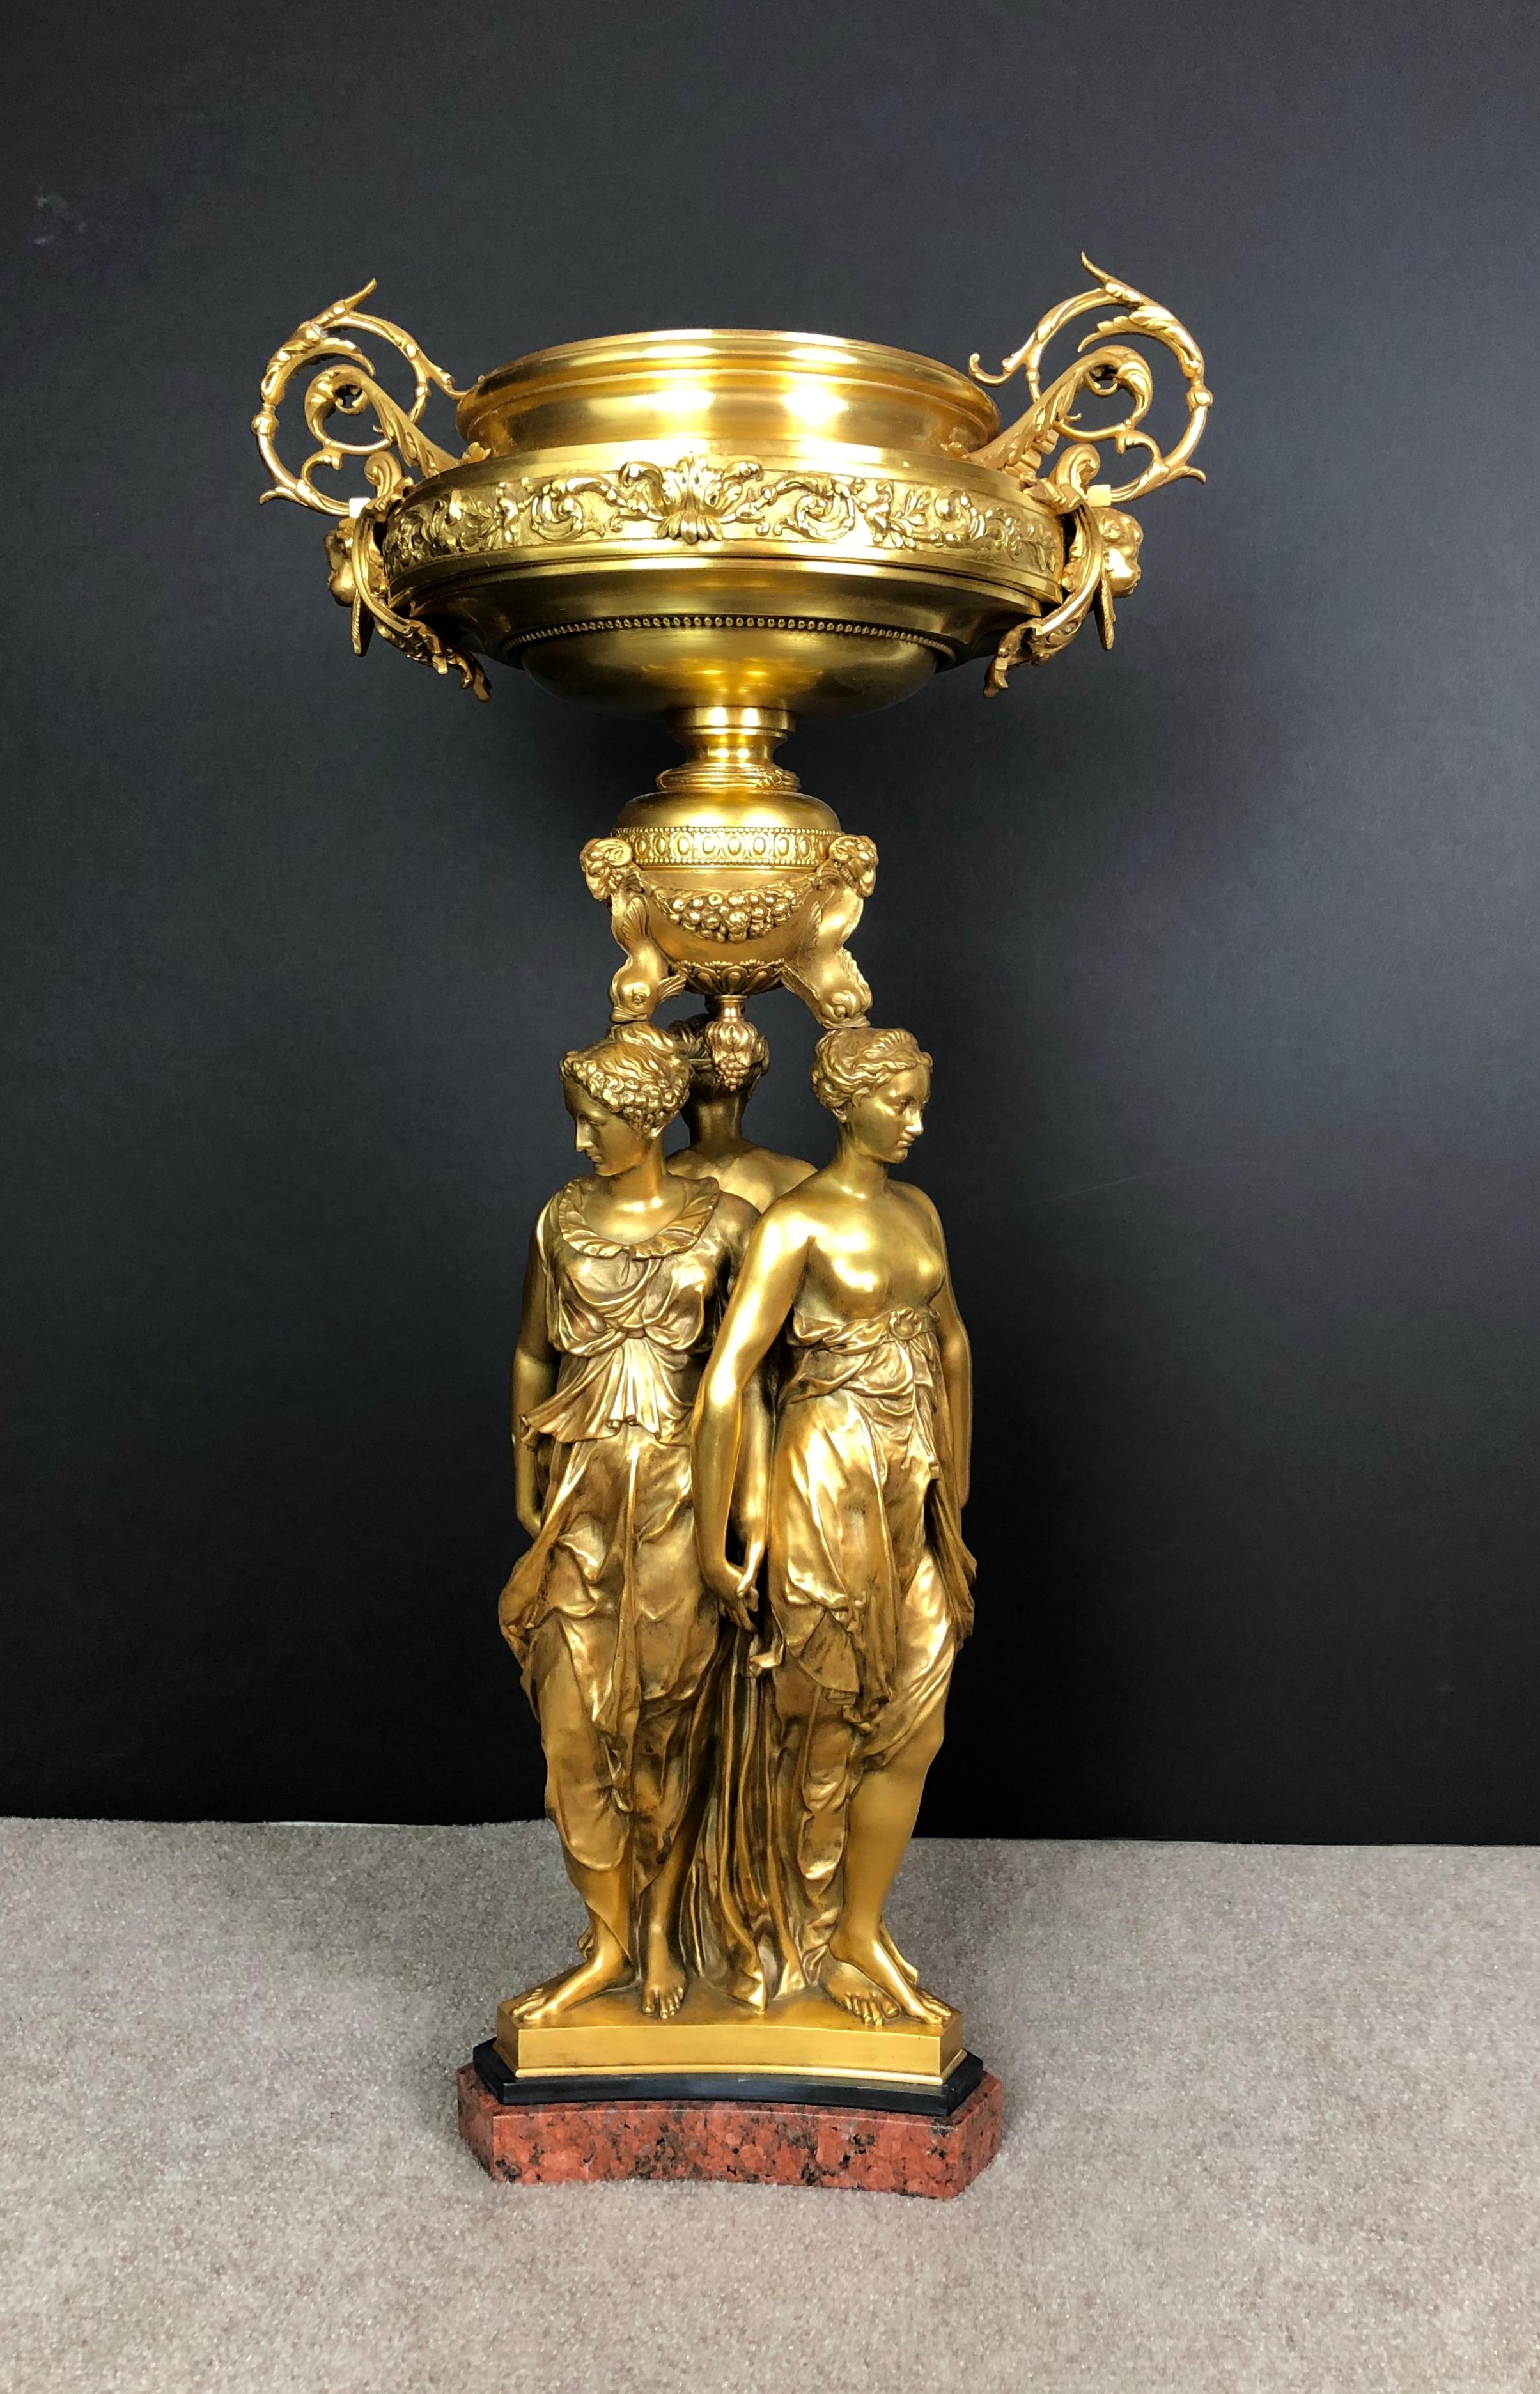 19th Century Signed Doré bronze Belle Époque Barbedienne centerpiece of large scale, in the Renaissance style, on a red and black marble base. Three graces gilt bronze figural sculpture centerpiece. 19th century antique, after a model by Germain